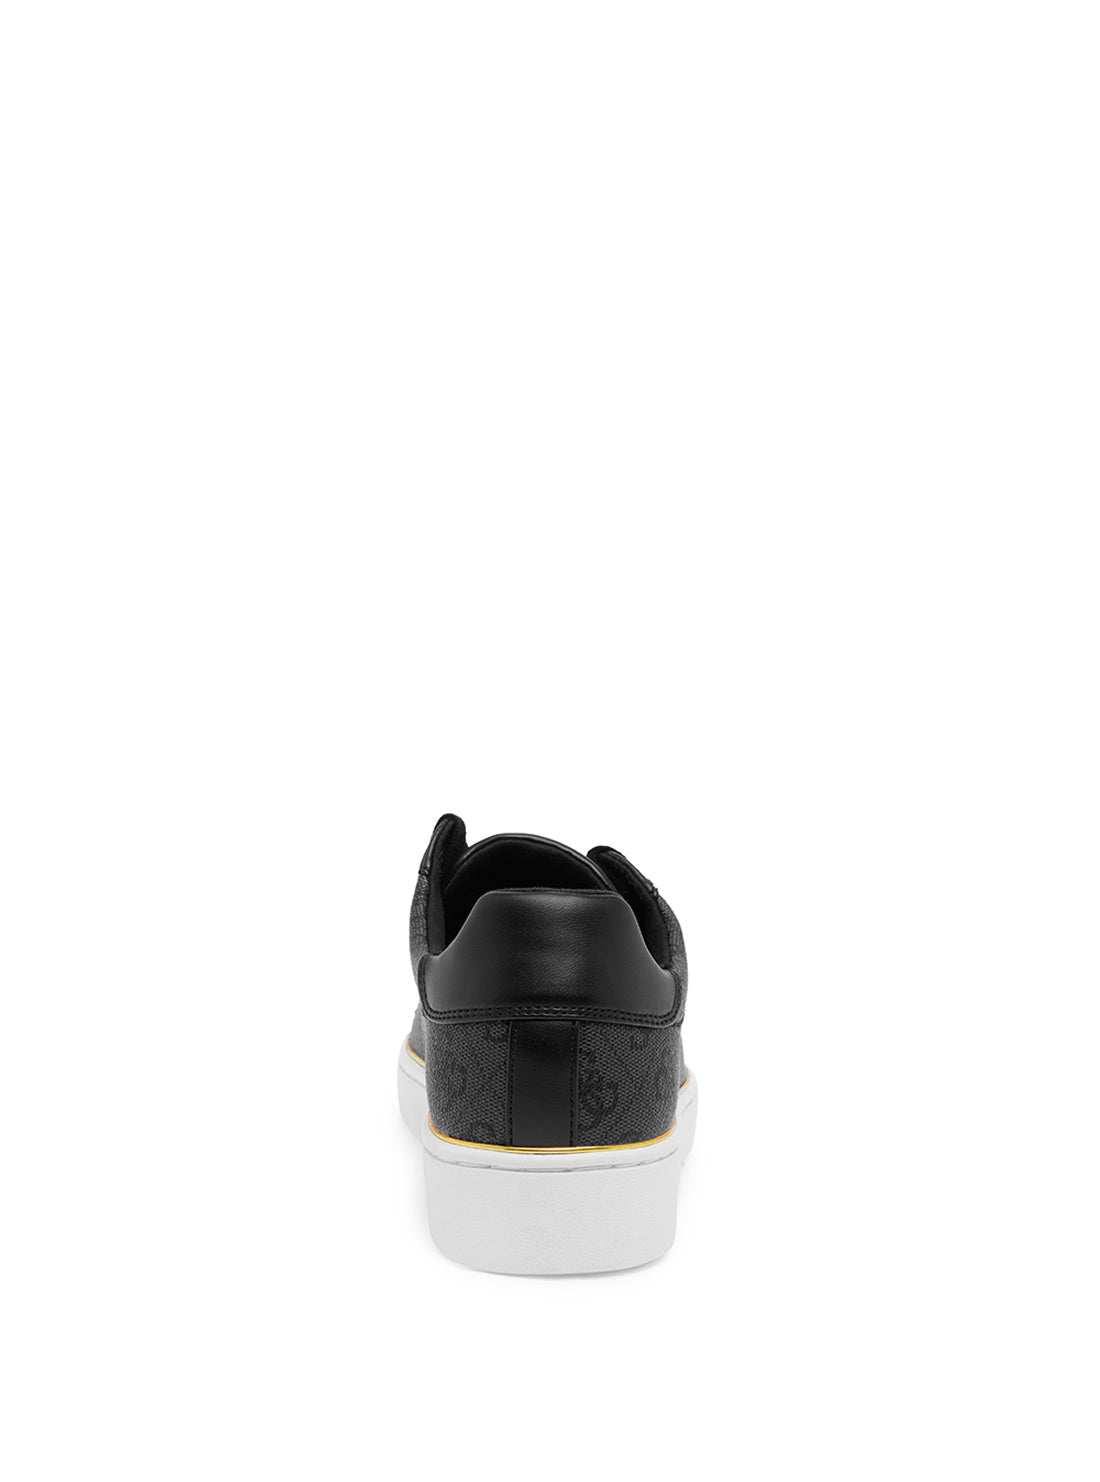 Black Logo Beckie Sneakers | GUESS Women's Shoes | back view